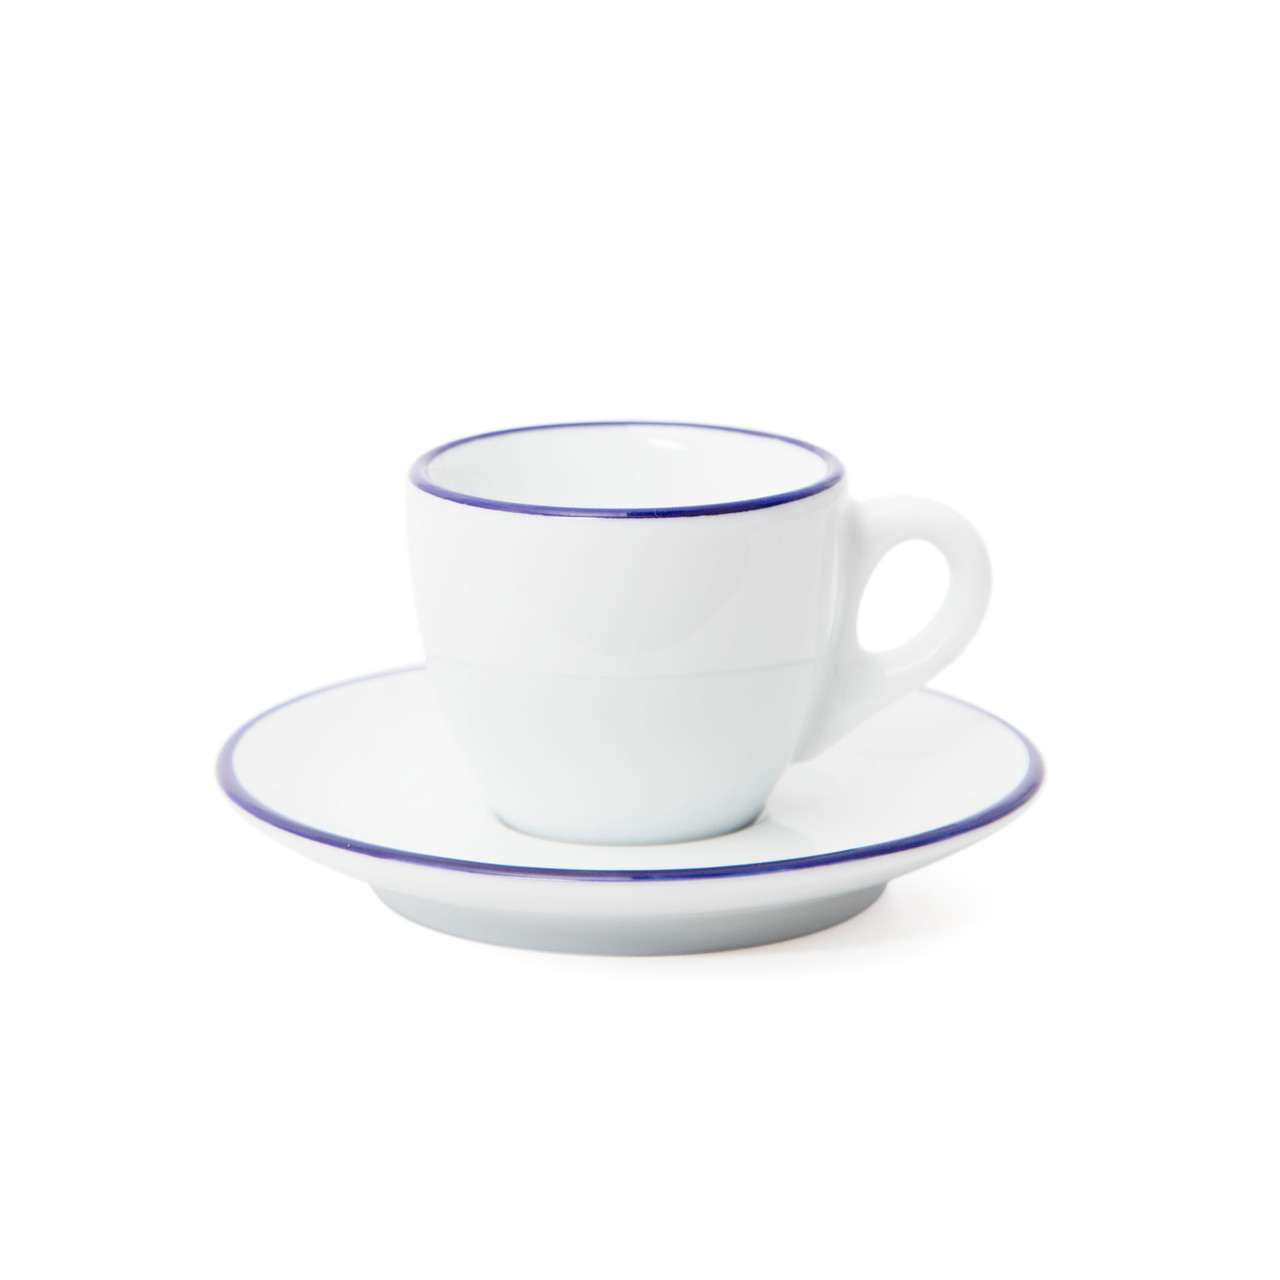 https://cdn11.bigcommerce.com/s-6h7ychjk4/images/stencil/1280x1280/products/8796/87938/Front-36739-Blue-Painted-Rim-Verona-Espresso-Cup-and-Saucer-2.5oz_1__16712.1597178461.jpg?c=1